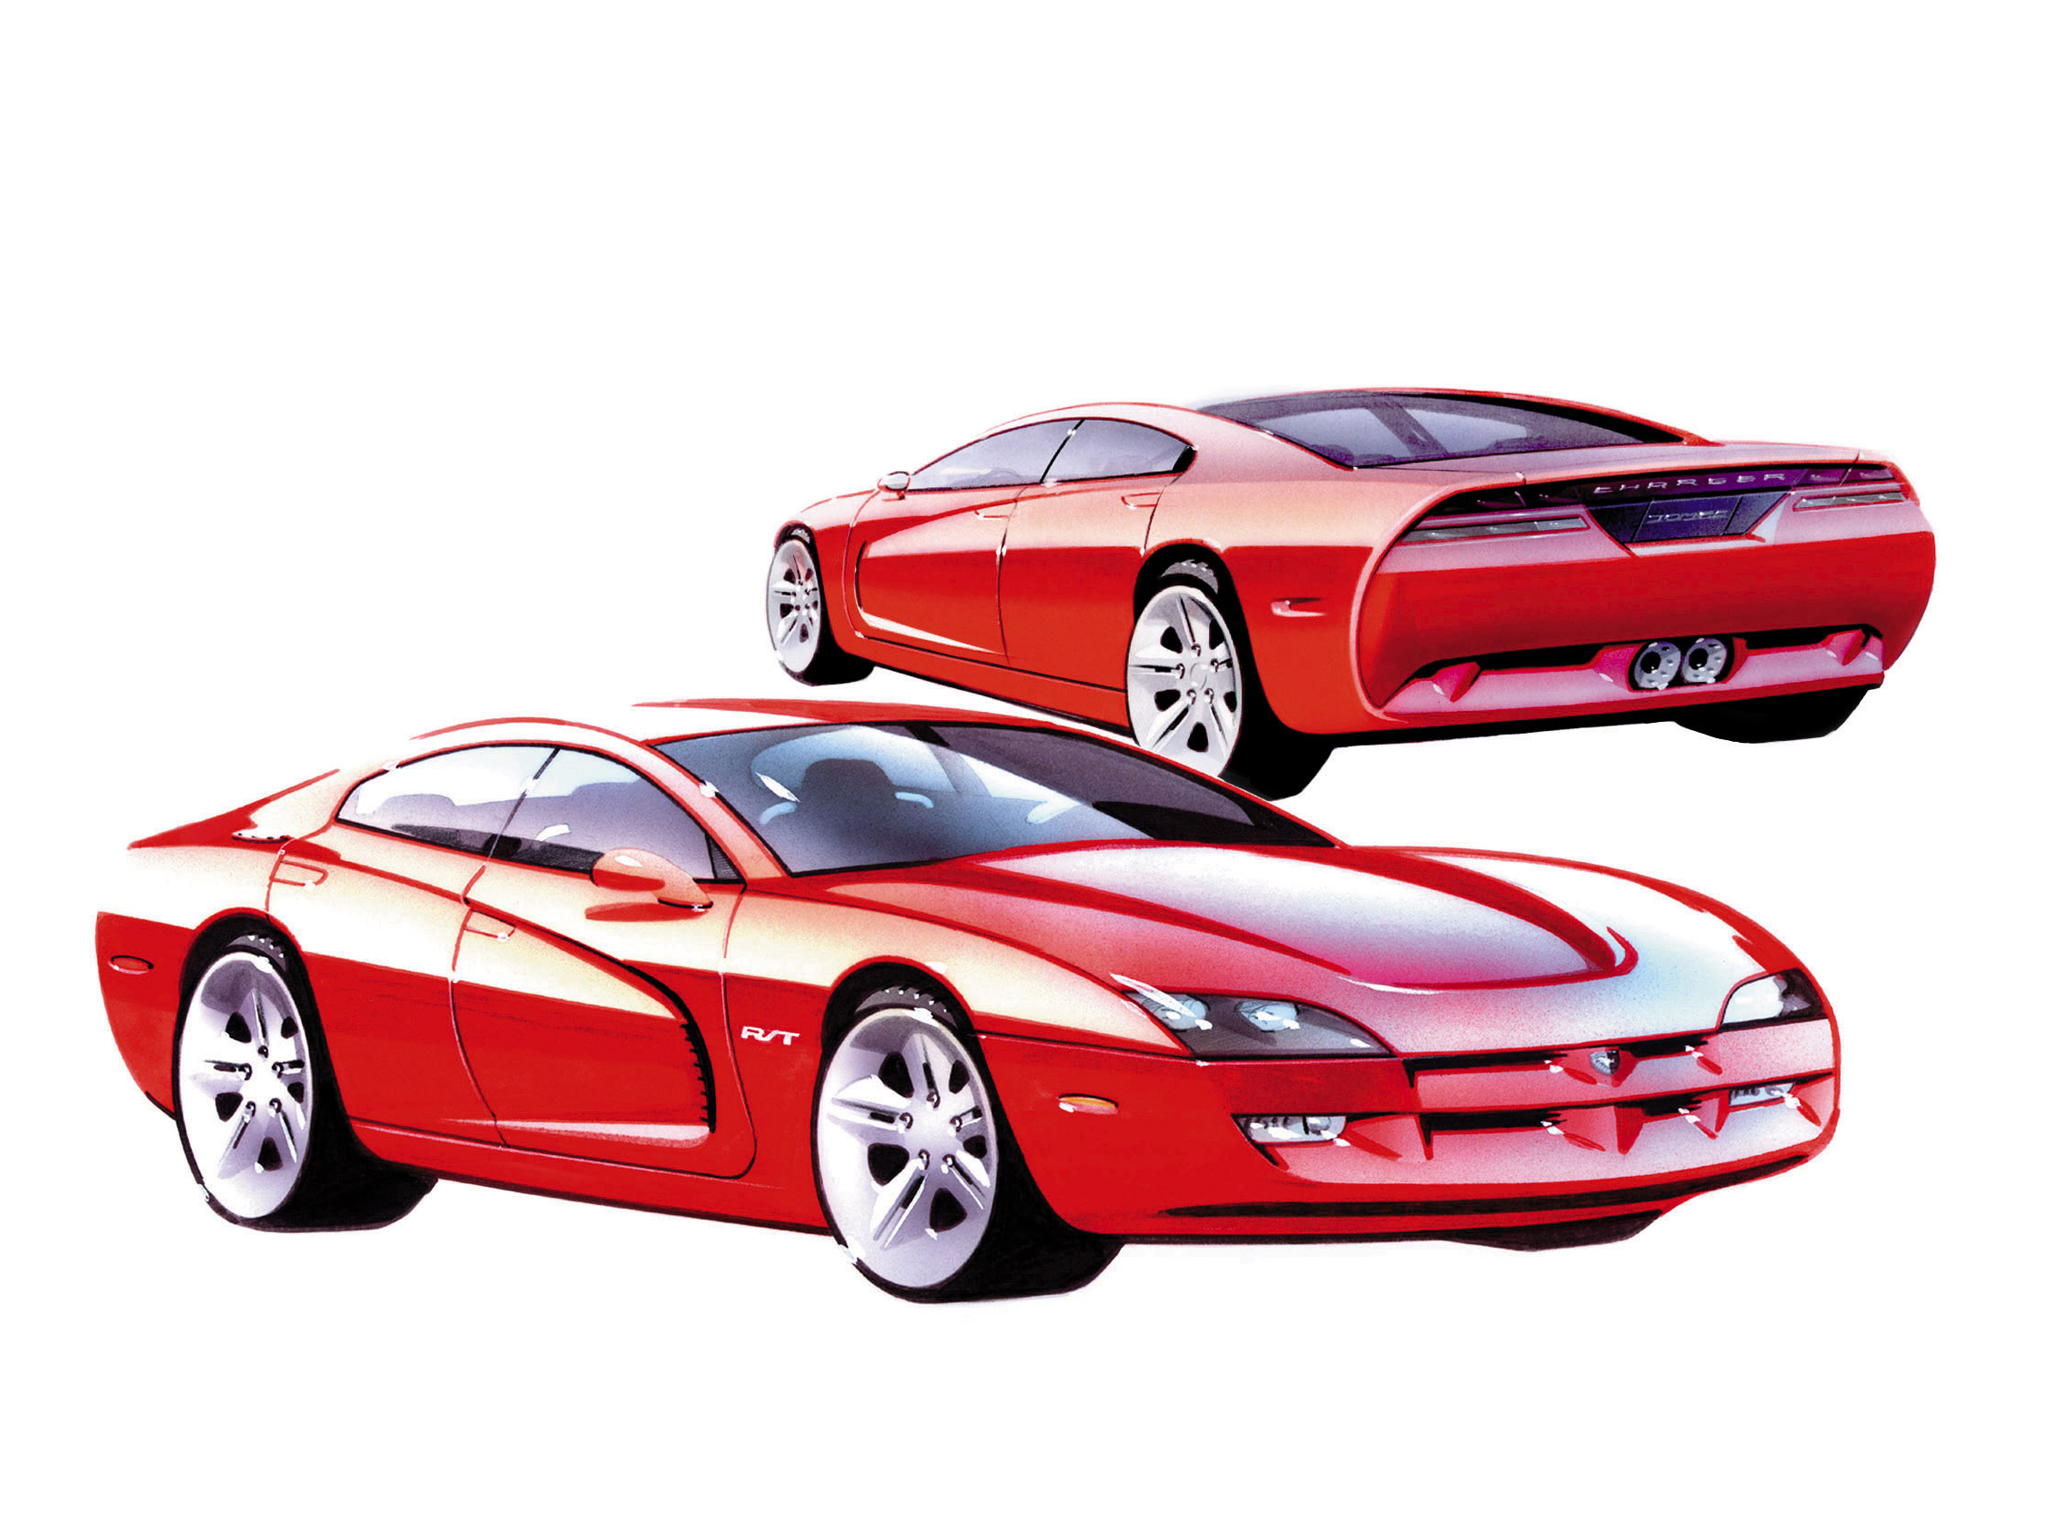 1999, Dodge, Charger, R t, Concept, Muscle, Supercar Wallpaper